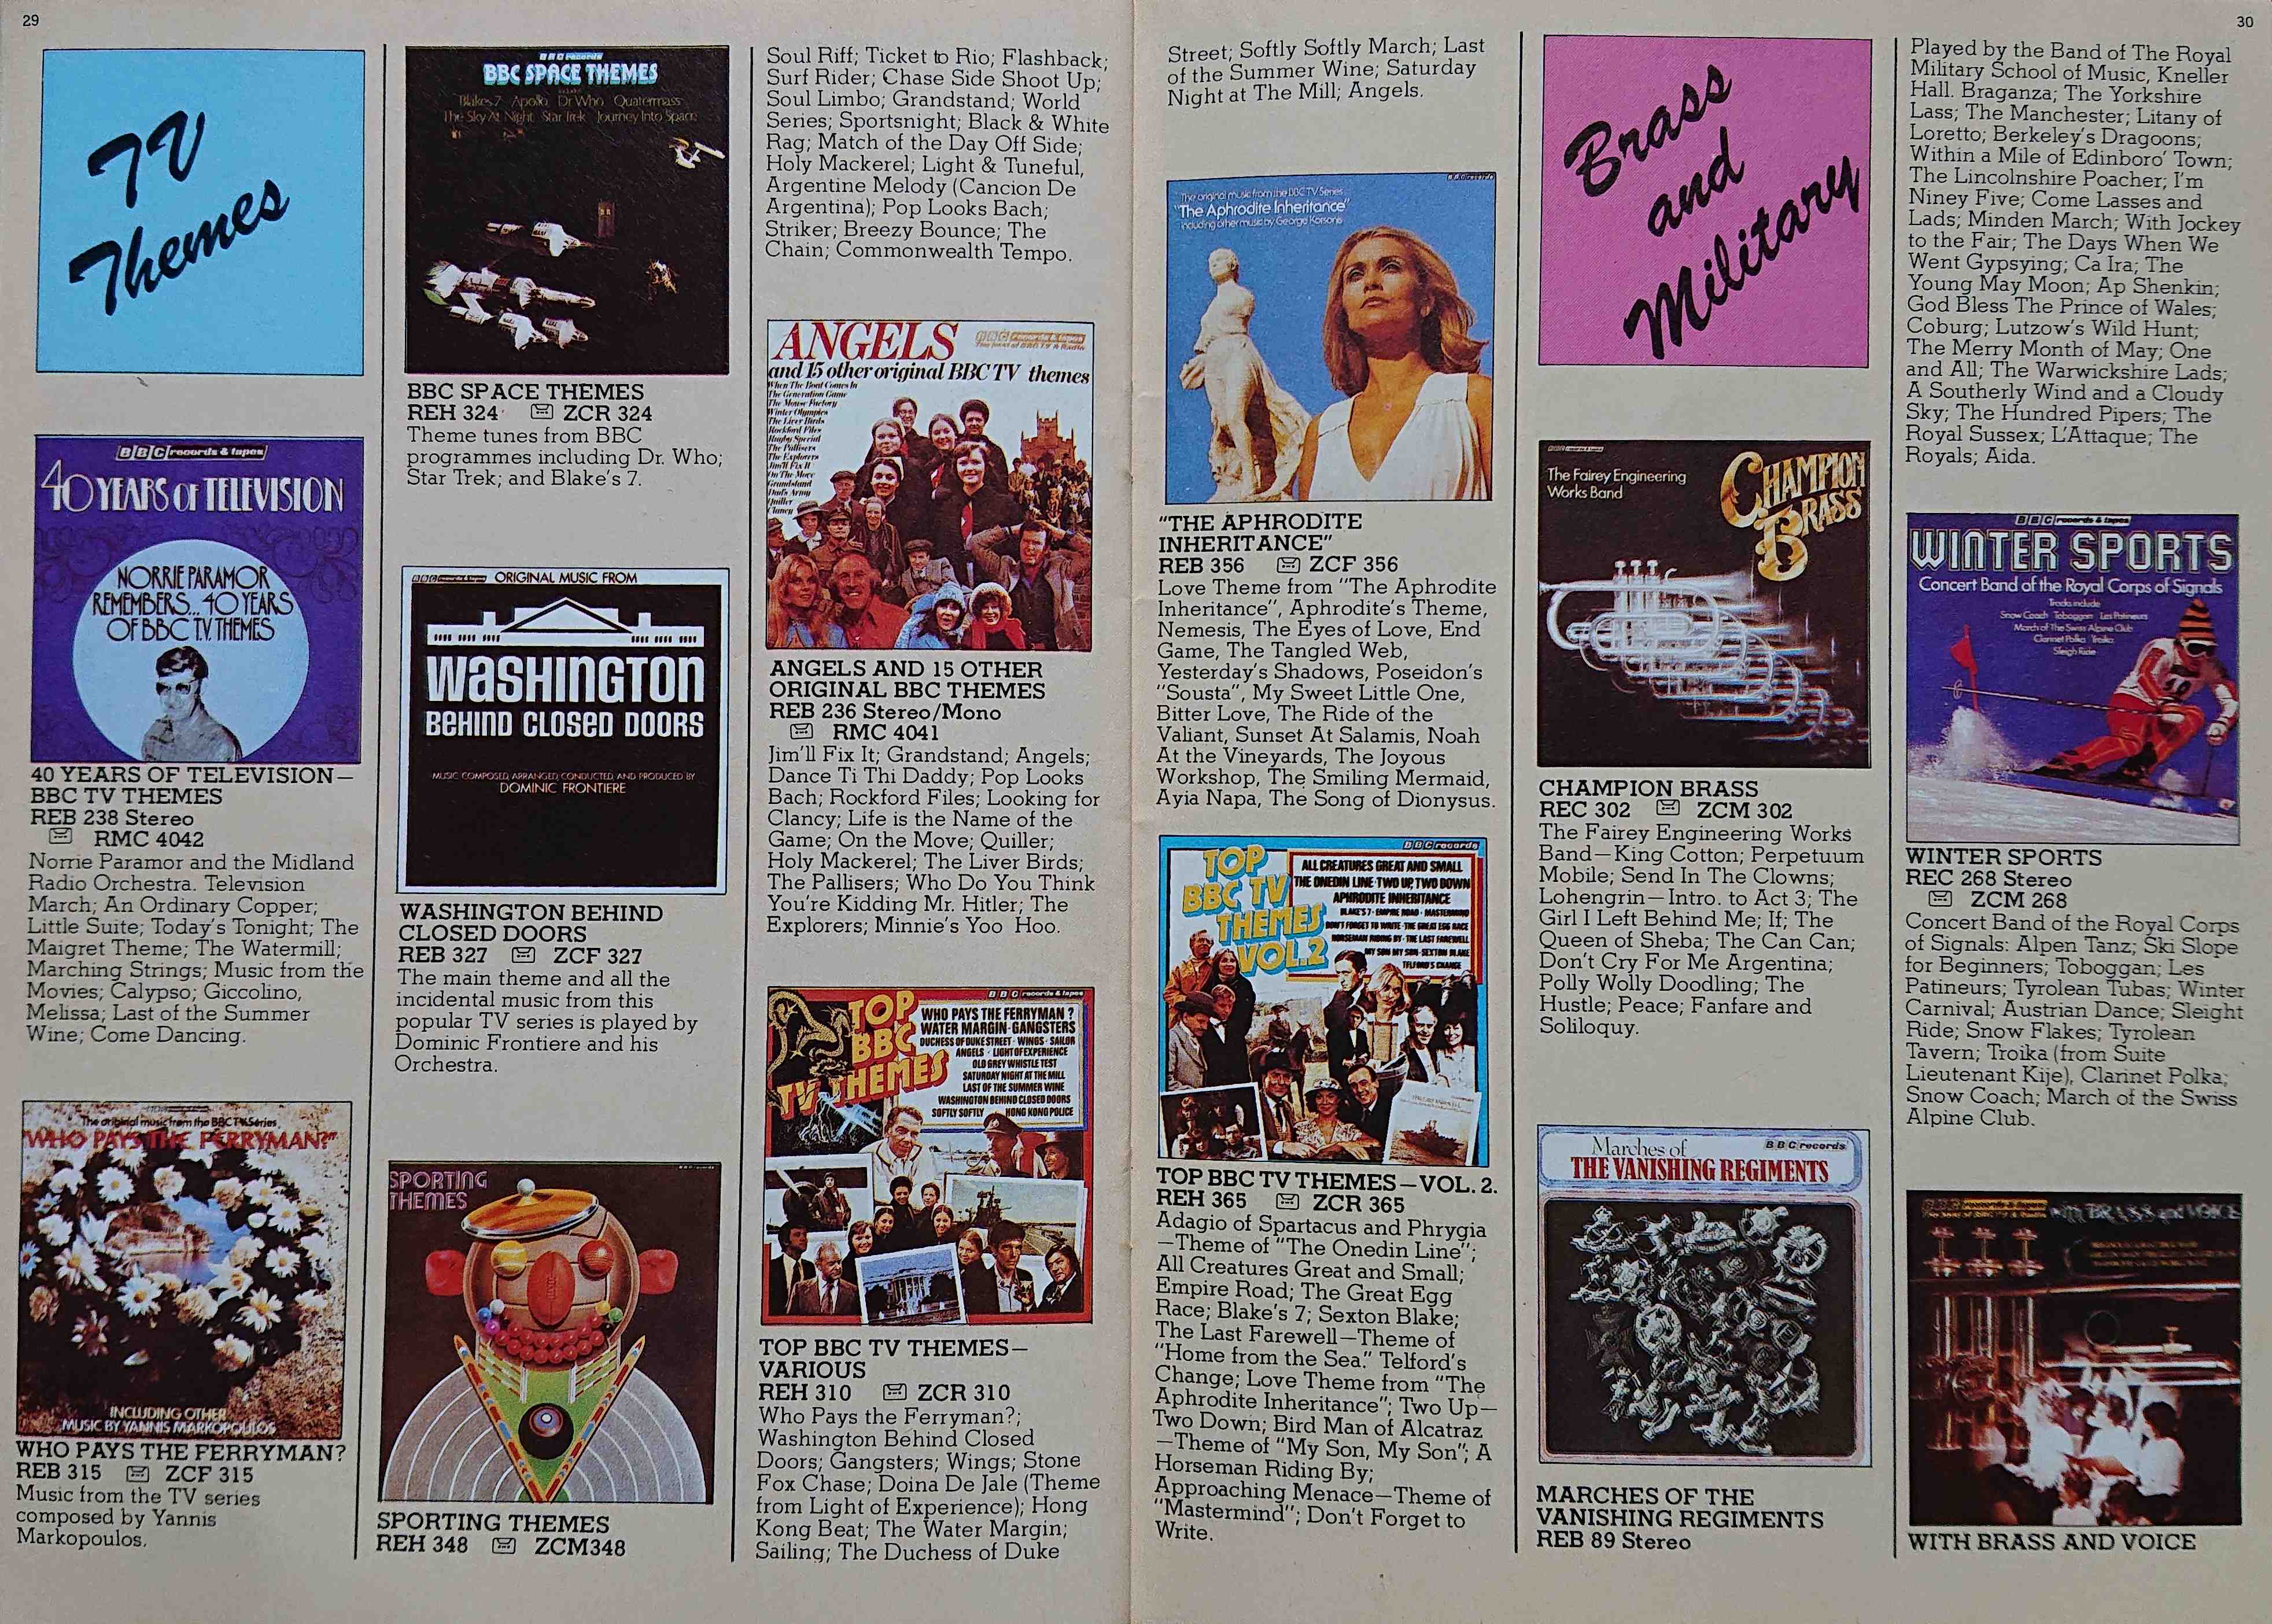 Other pages of catalogue BBC Records catalogue 1983